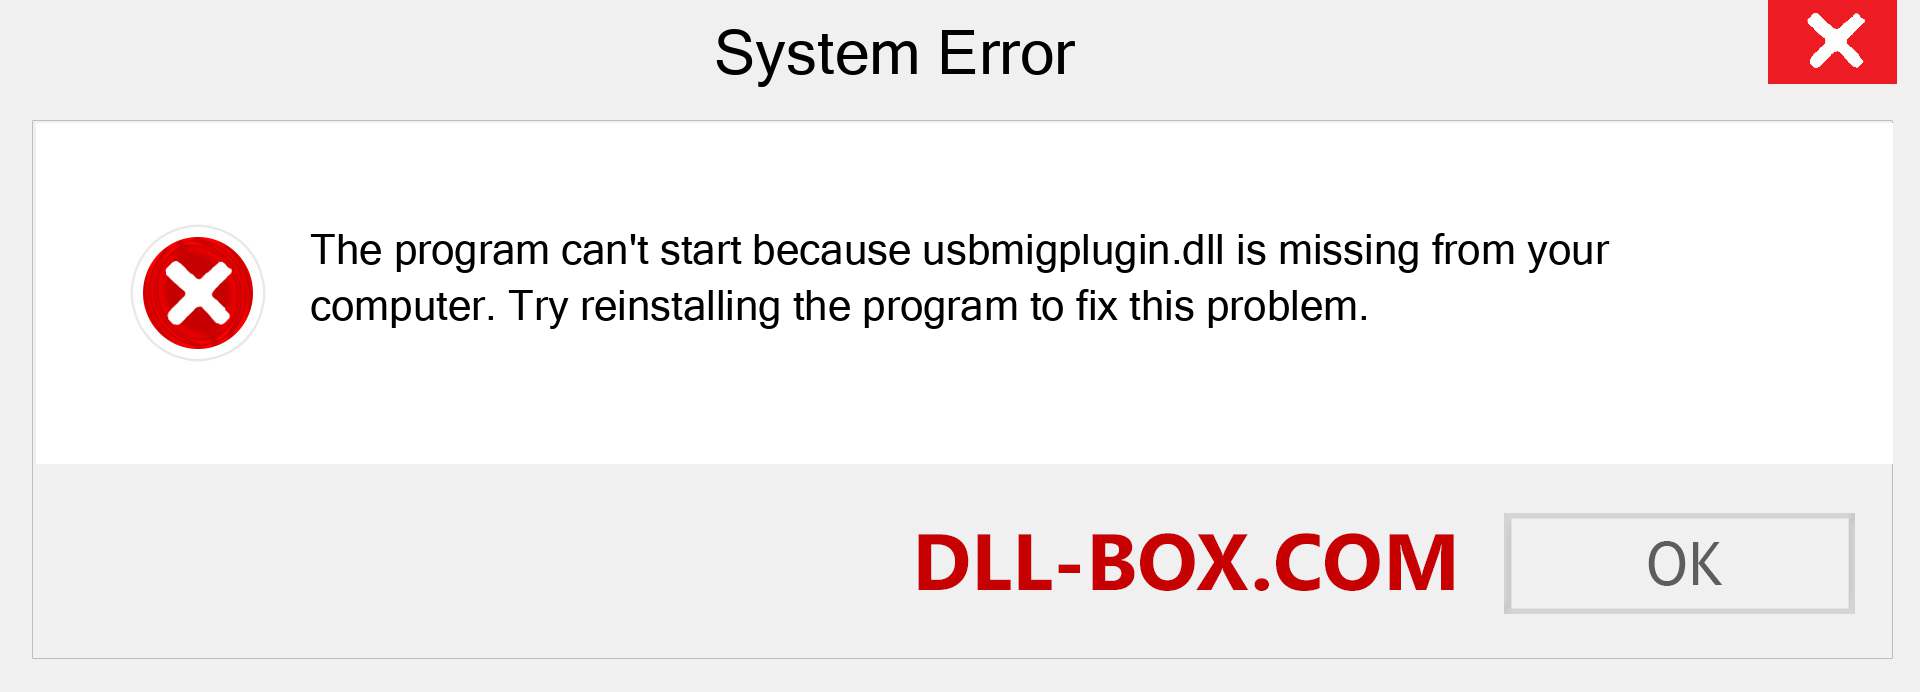  usbmigplugin.dll file is missing?. Download for Windows 7, 8, 10 - Fix  usbmigplugin dll Missing Error on Windows, photos, images